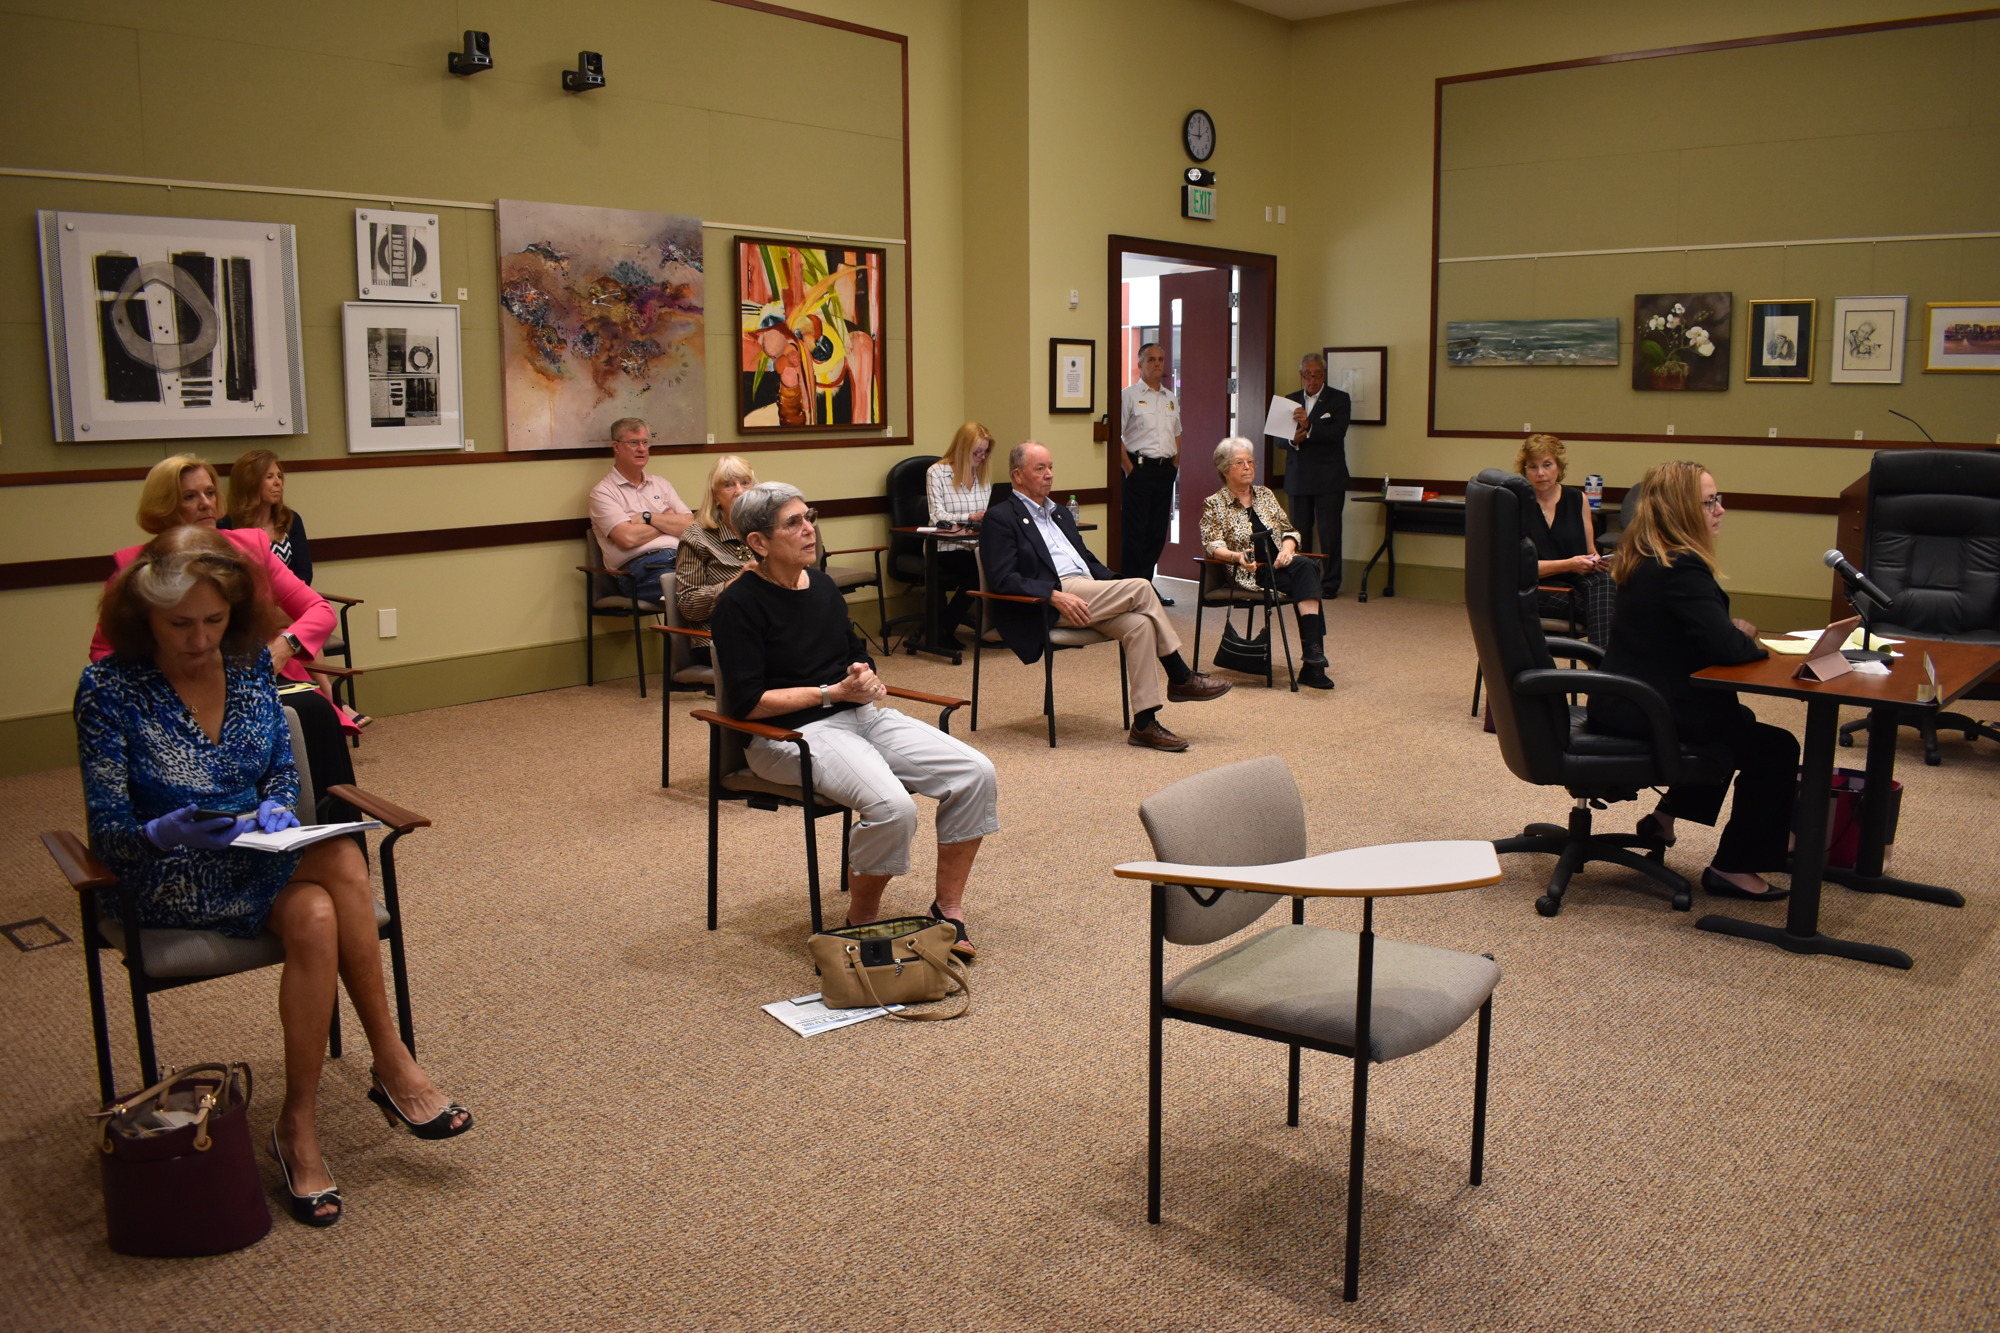 About 20 or so people attended the Longboat Key statutory meeting on Monday, March 23, 2020. Town staff did its best to space out the chairs to practice appropriate social distancing amid concerns about the coronavirus pandemic.